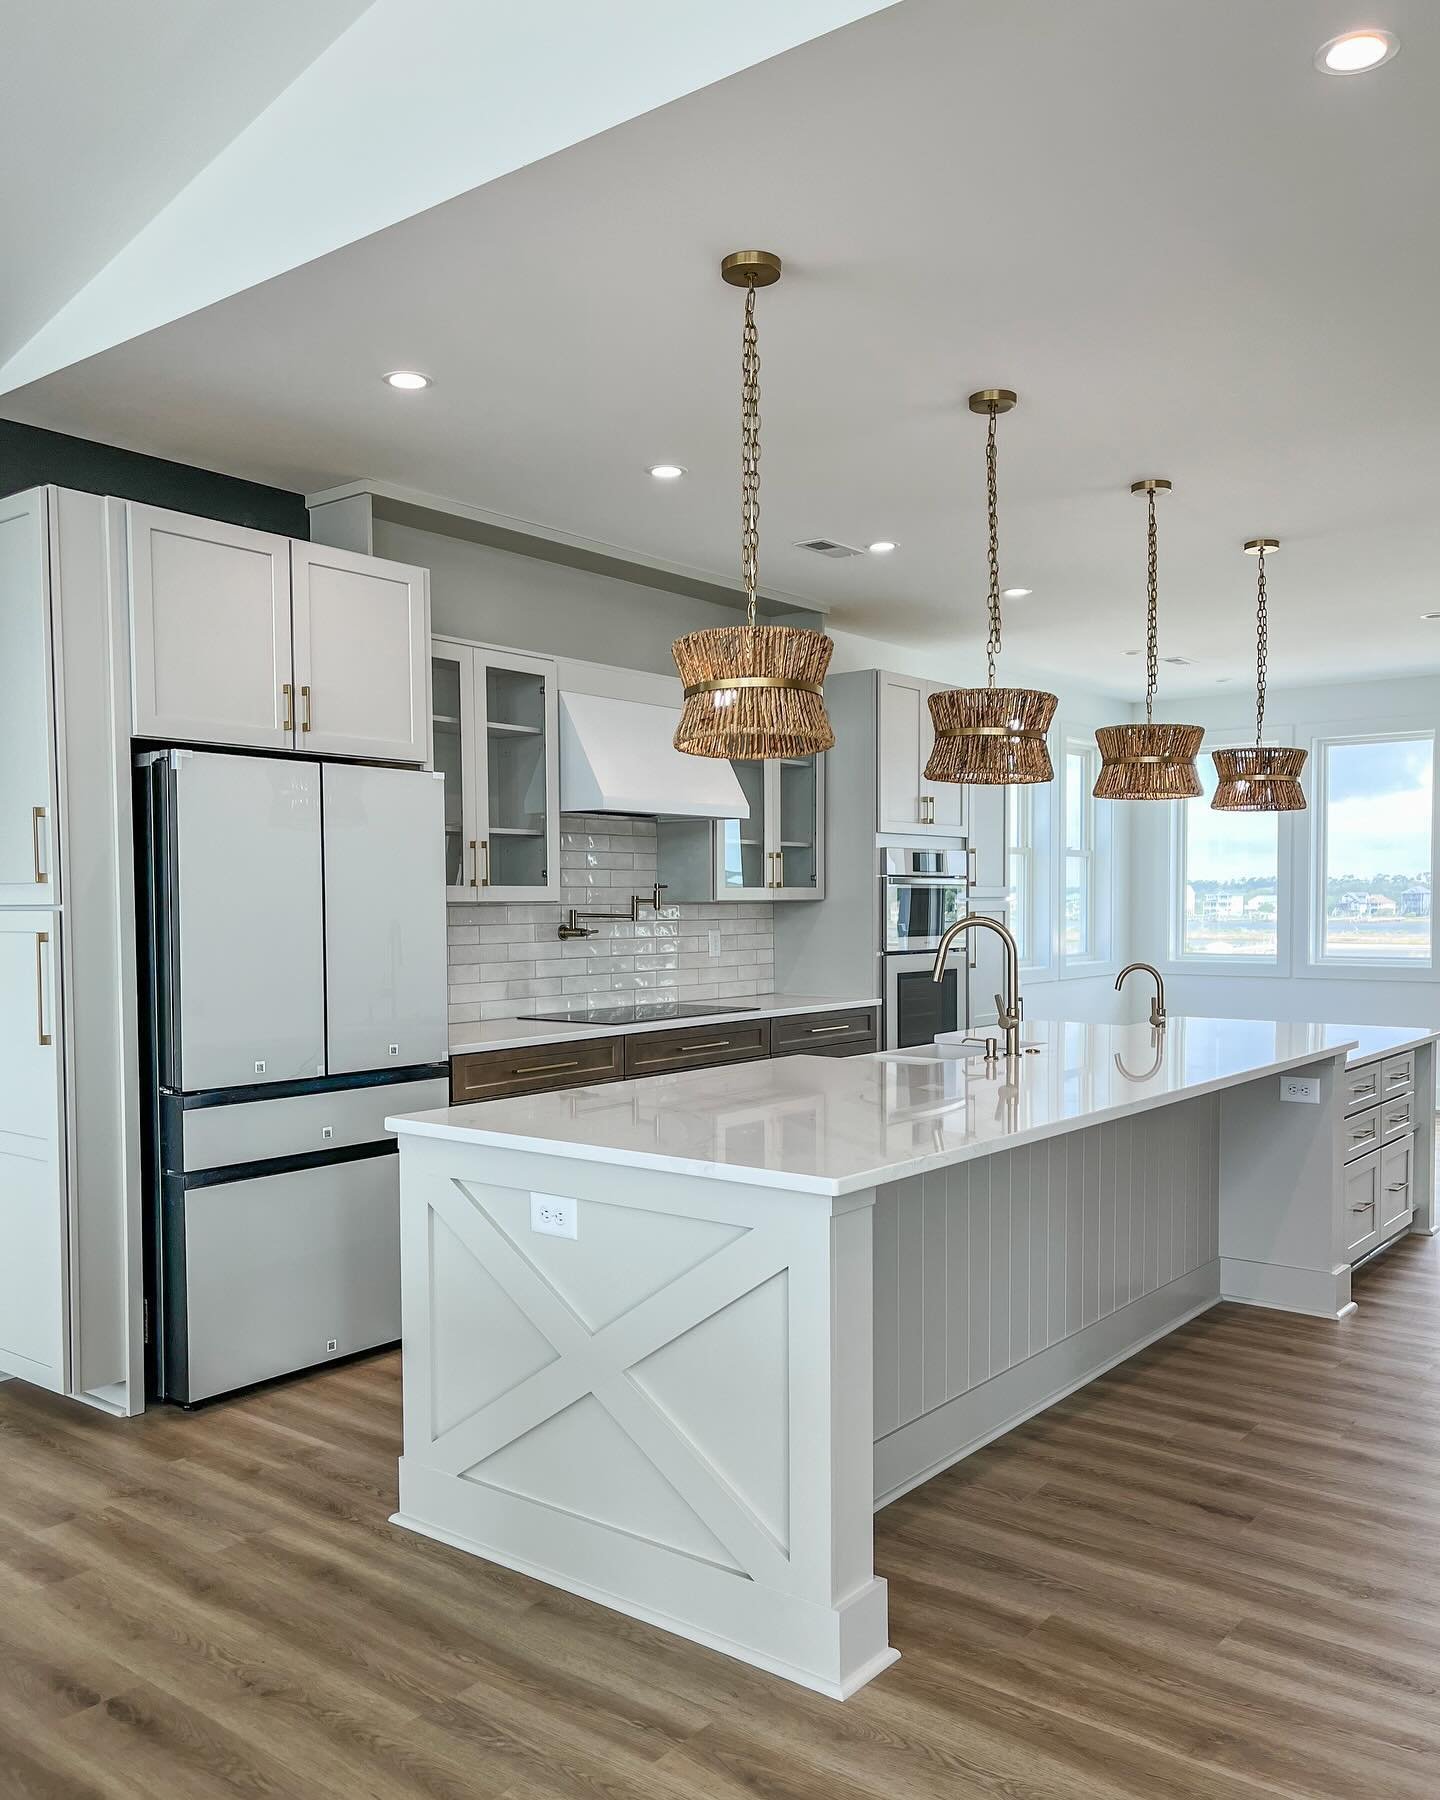 A coastal farmhouse-style kitchen with stunning features around every corner, quite literally.

Swipe to see this stunner with an extended island + prep sink, and cabinetry, and drawers galore!

#coastalkitchen #farmhousekitchen #topsailisland #beach